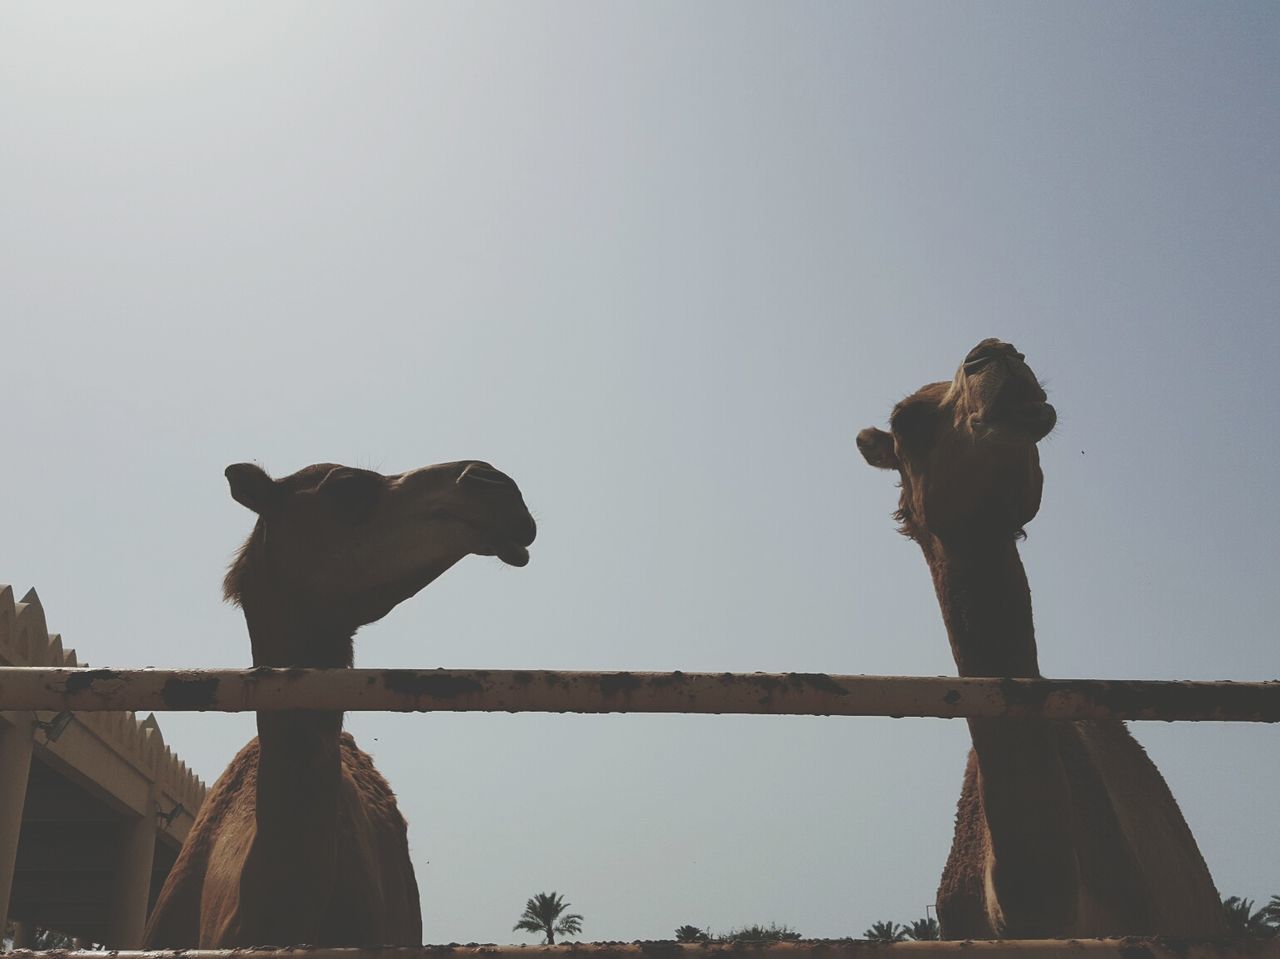 Camels against clear sky